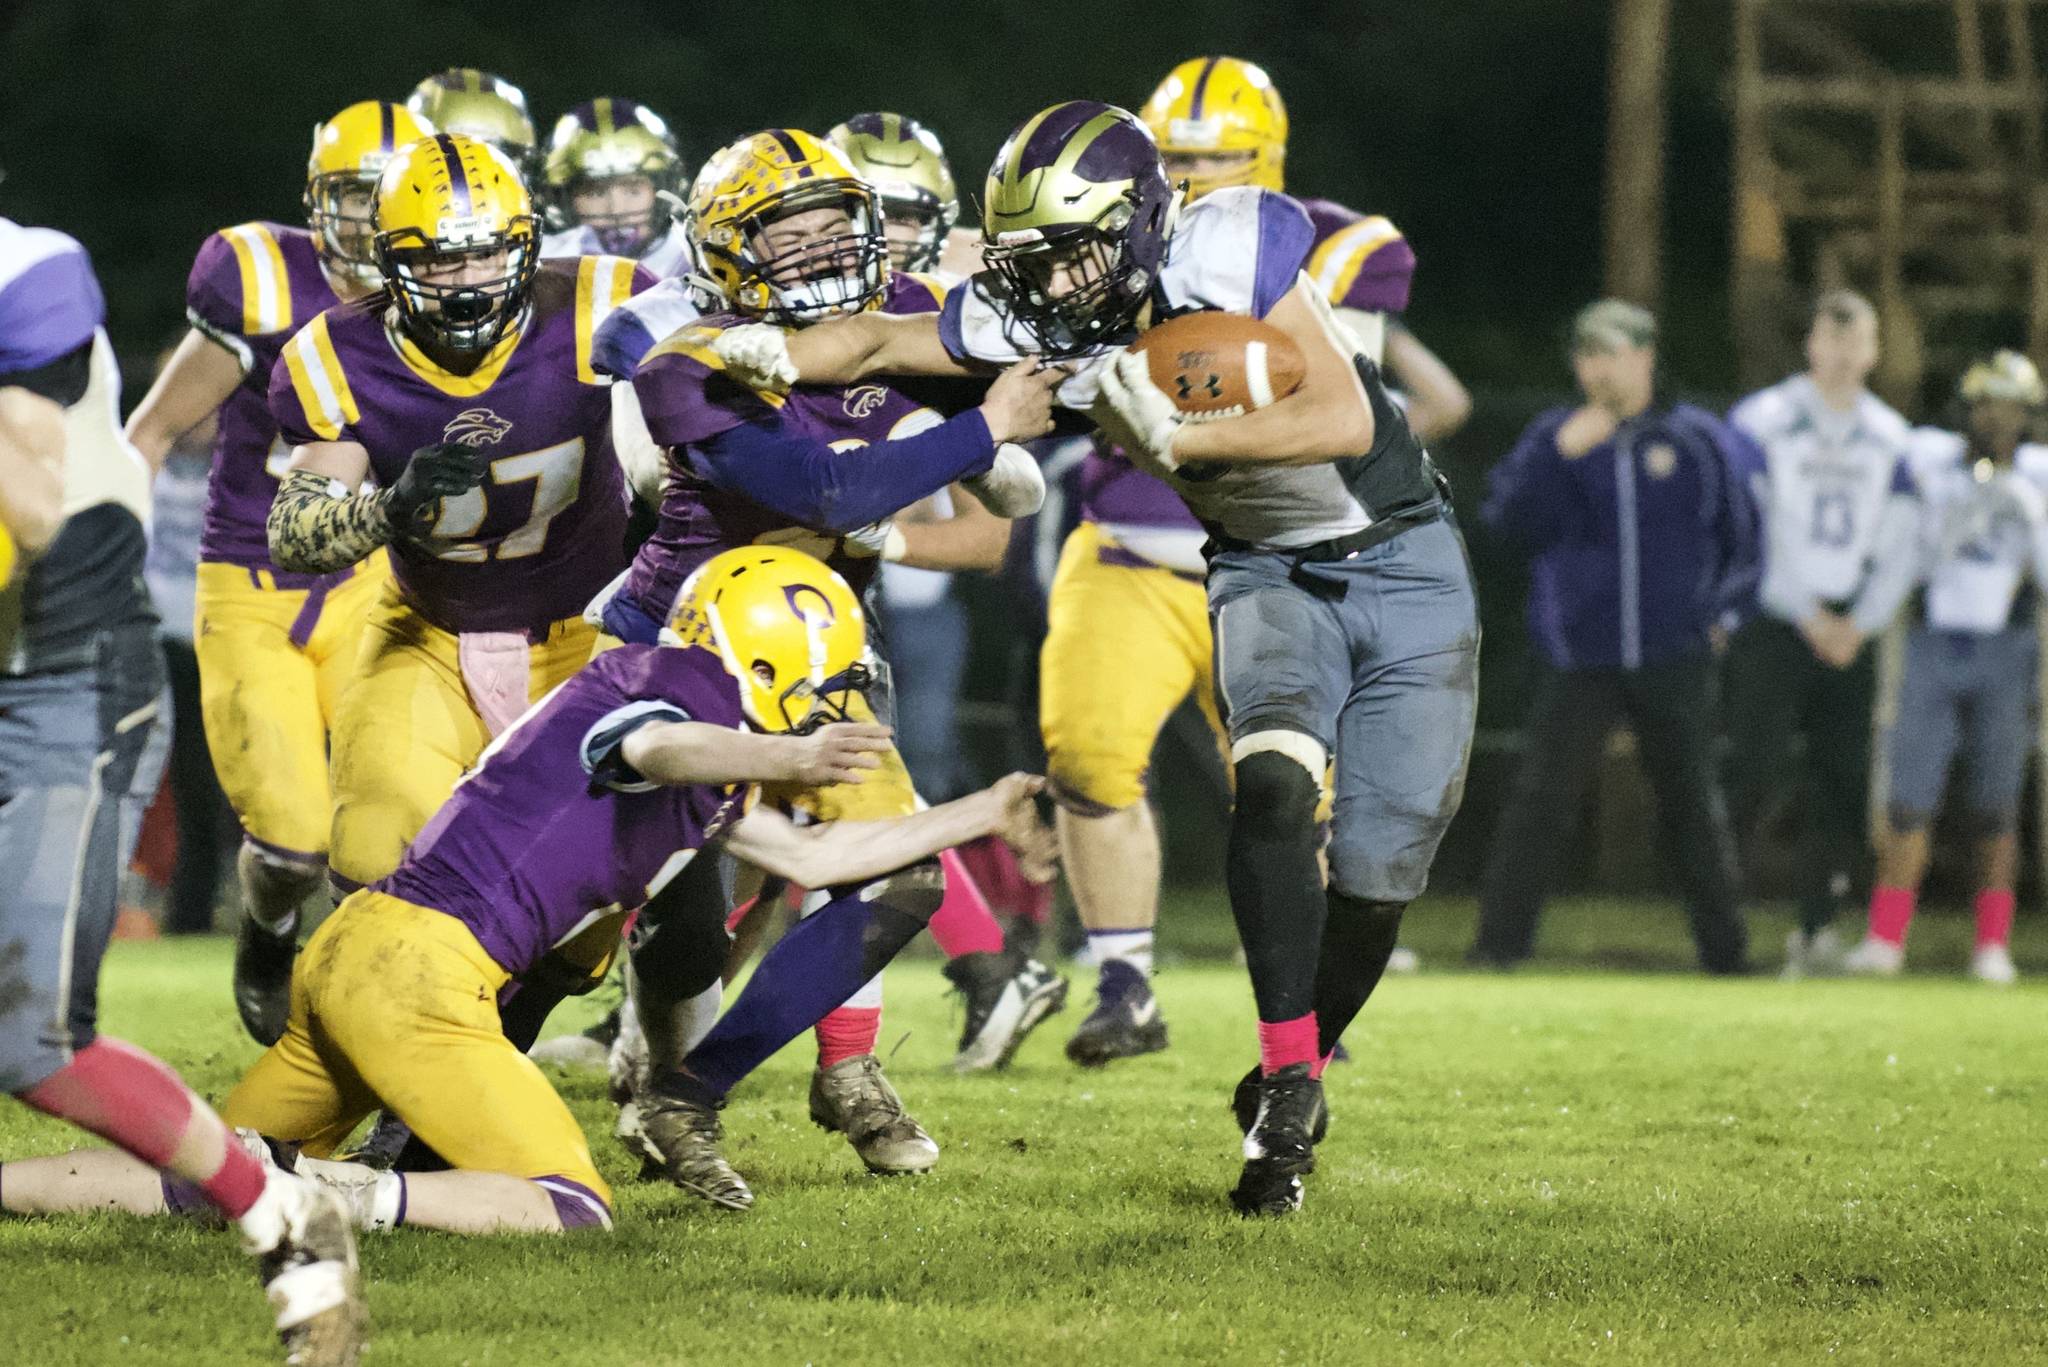 Kaden Ritchie, No. 32, fights his way through the Lions for a good yardage gain. (John Stimpson/Contributed photo)